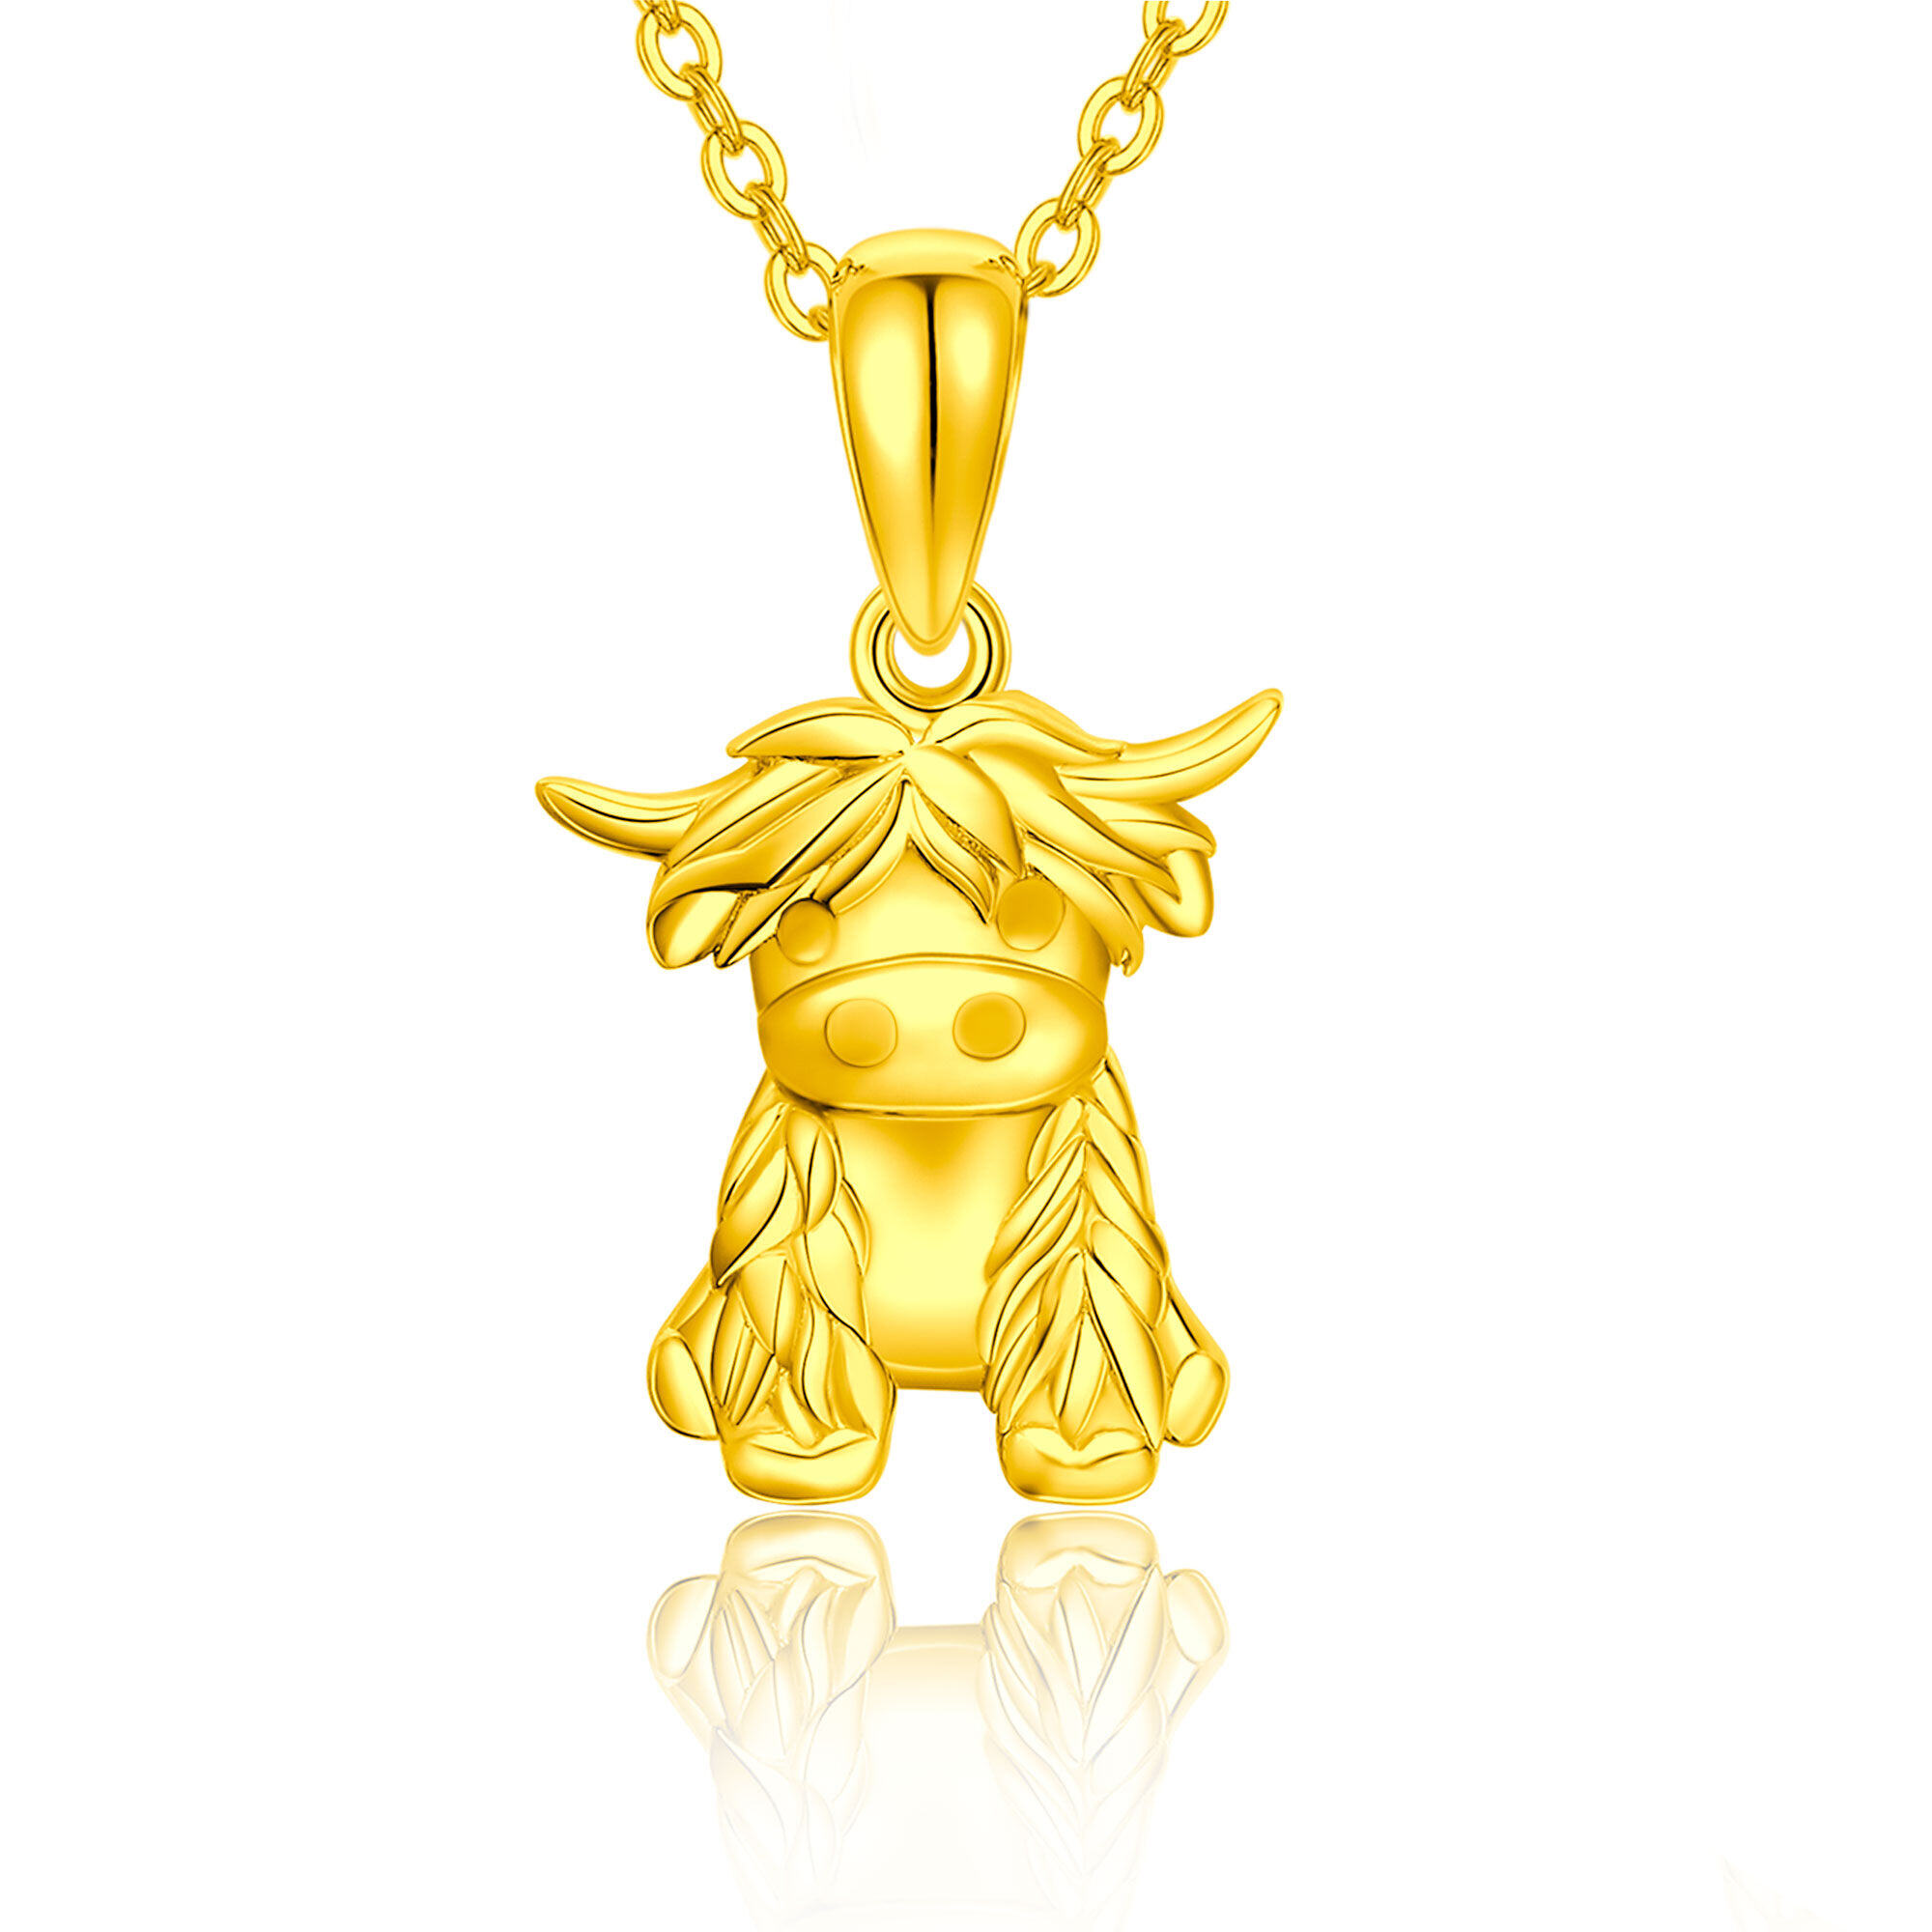 Highland Cow Necklaces